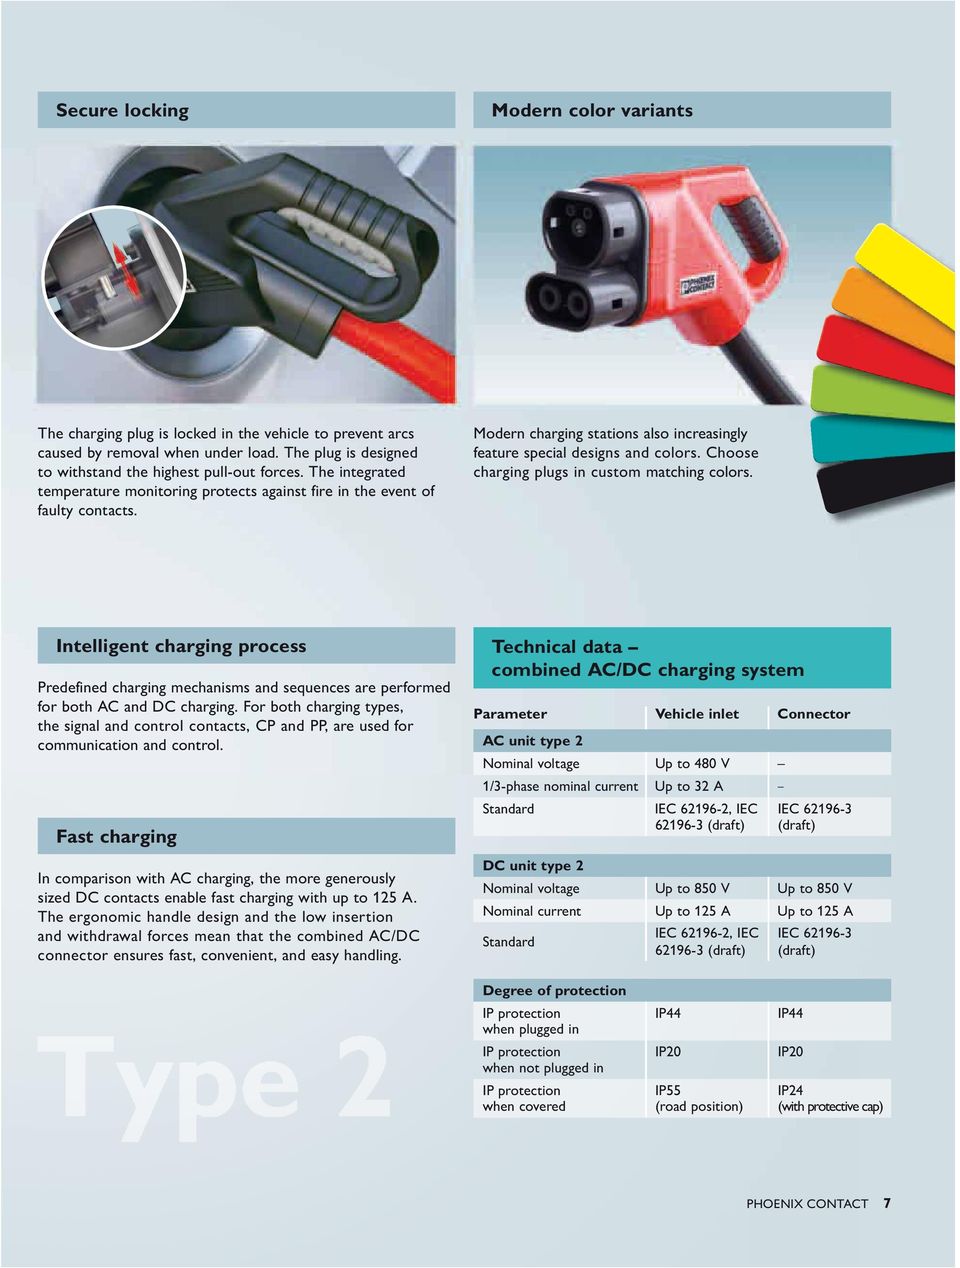 Choose charging plugs in custom matching colors. Intelligent charging process Predefined charging mechanisms and sequences are performed for both AC and DC charging.